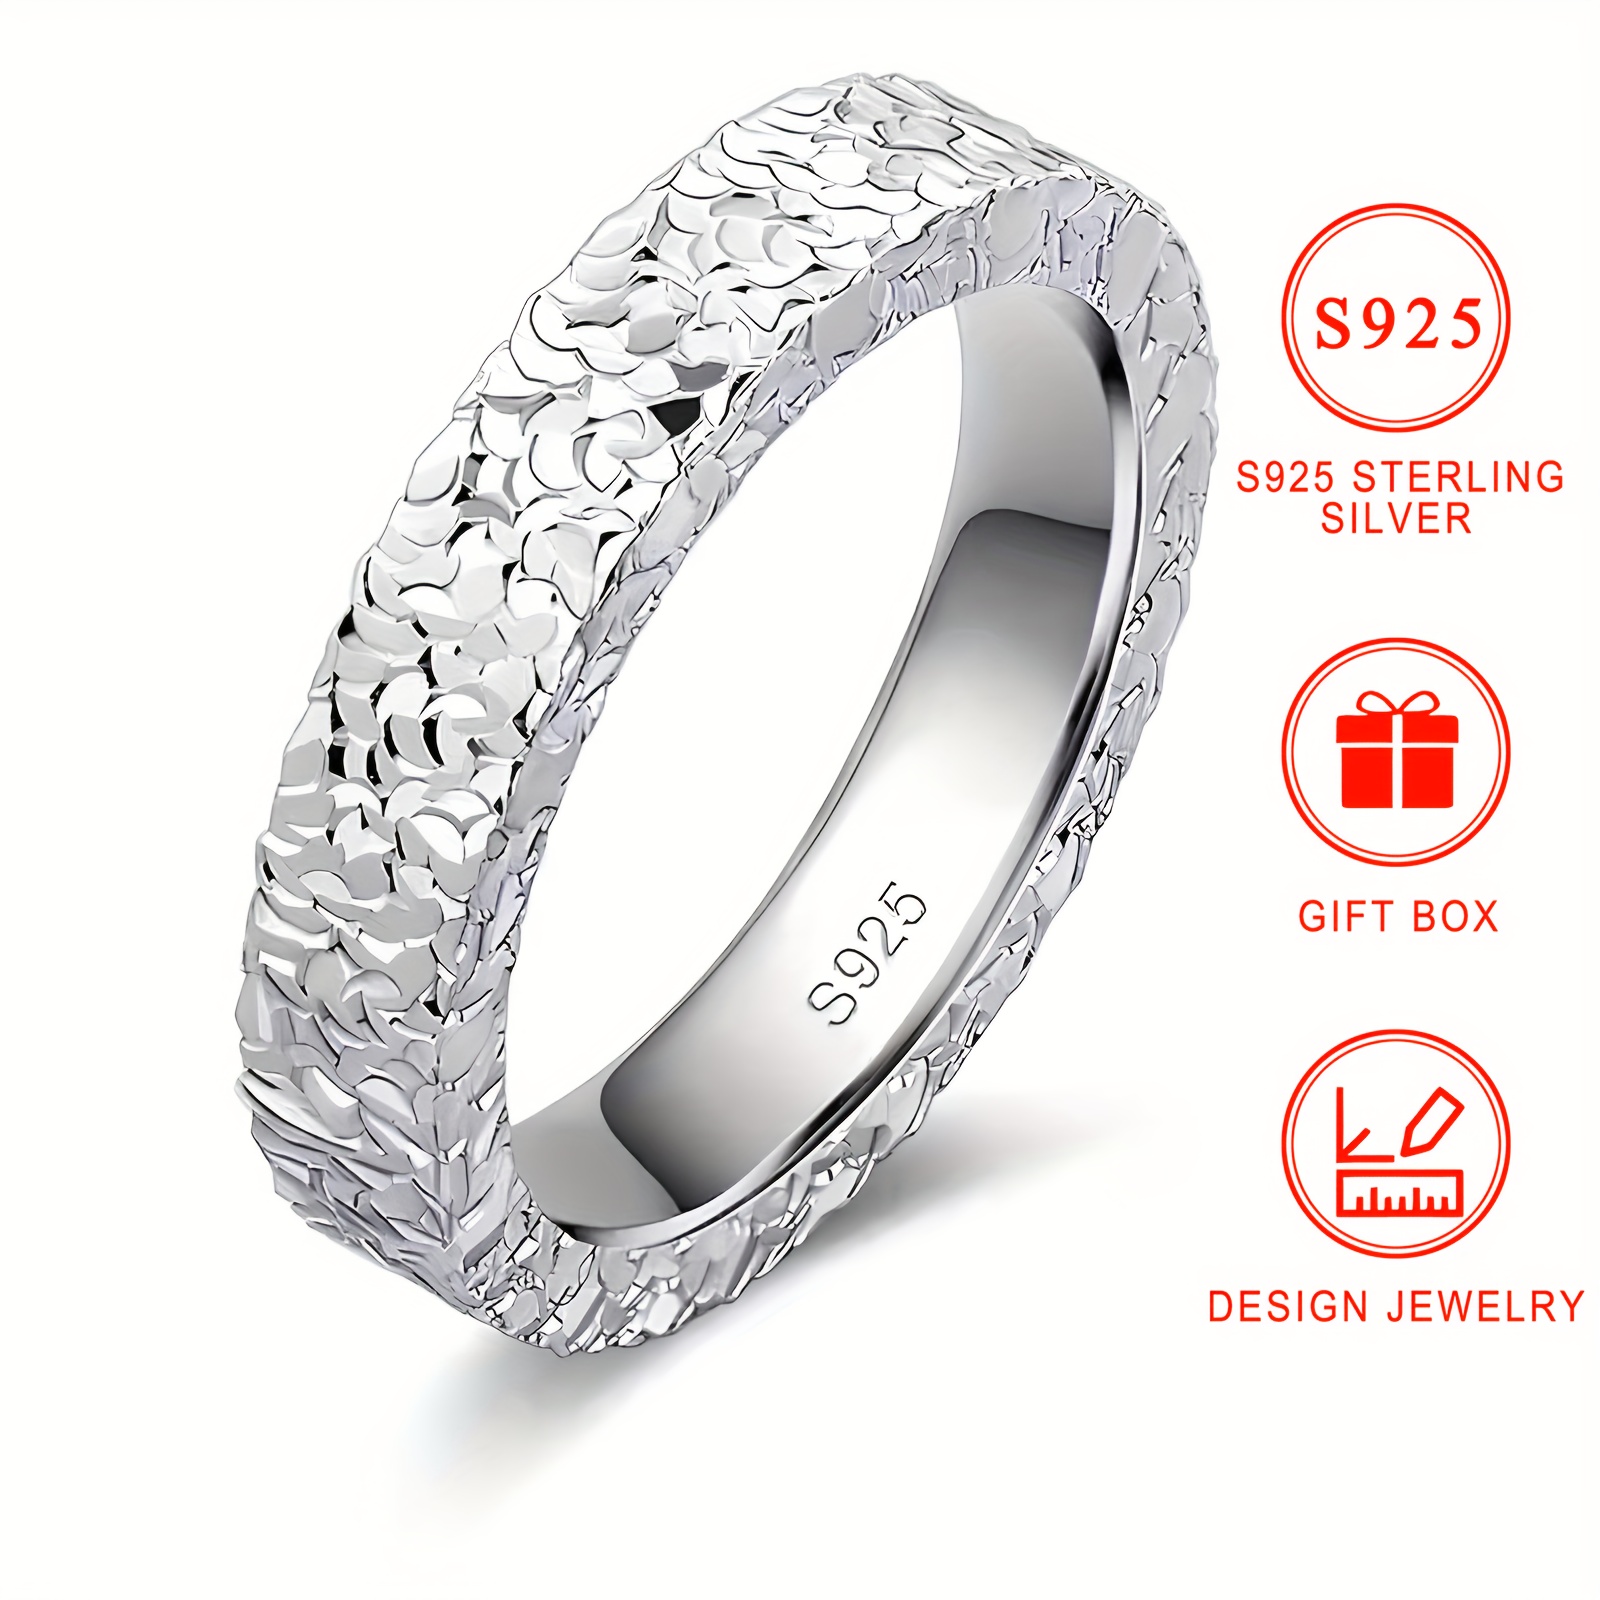 

S925 Sterling Silver Sparkling Faceted Design Ring, Luxury Style Band Jewelry, Ideal For Daily Wear Classic Style Gifts For Women With Gift Box